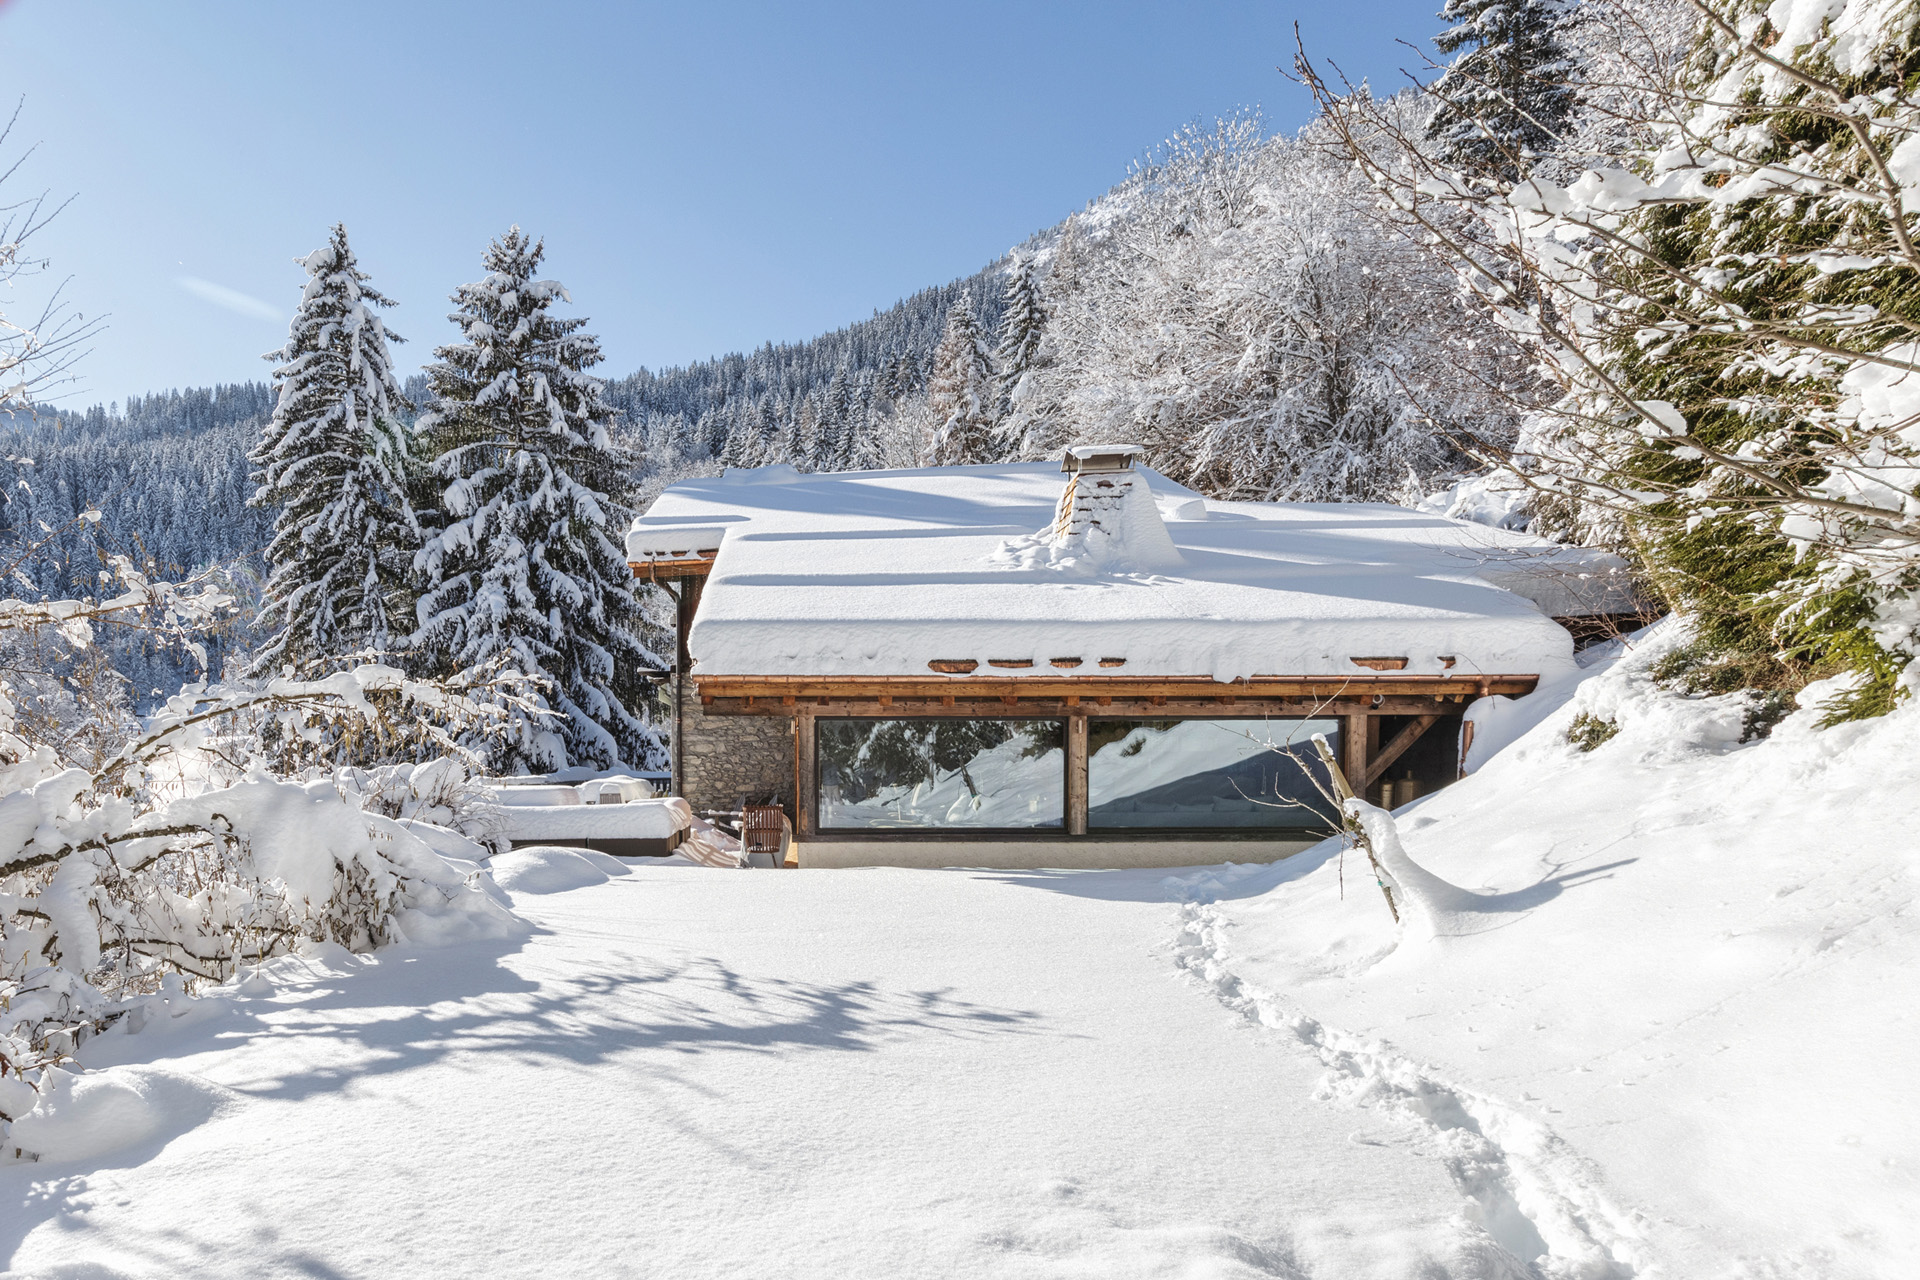 Guide to catered ski chalets in the Alps